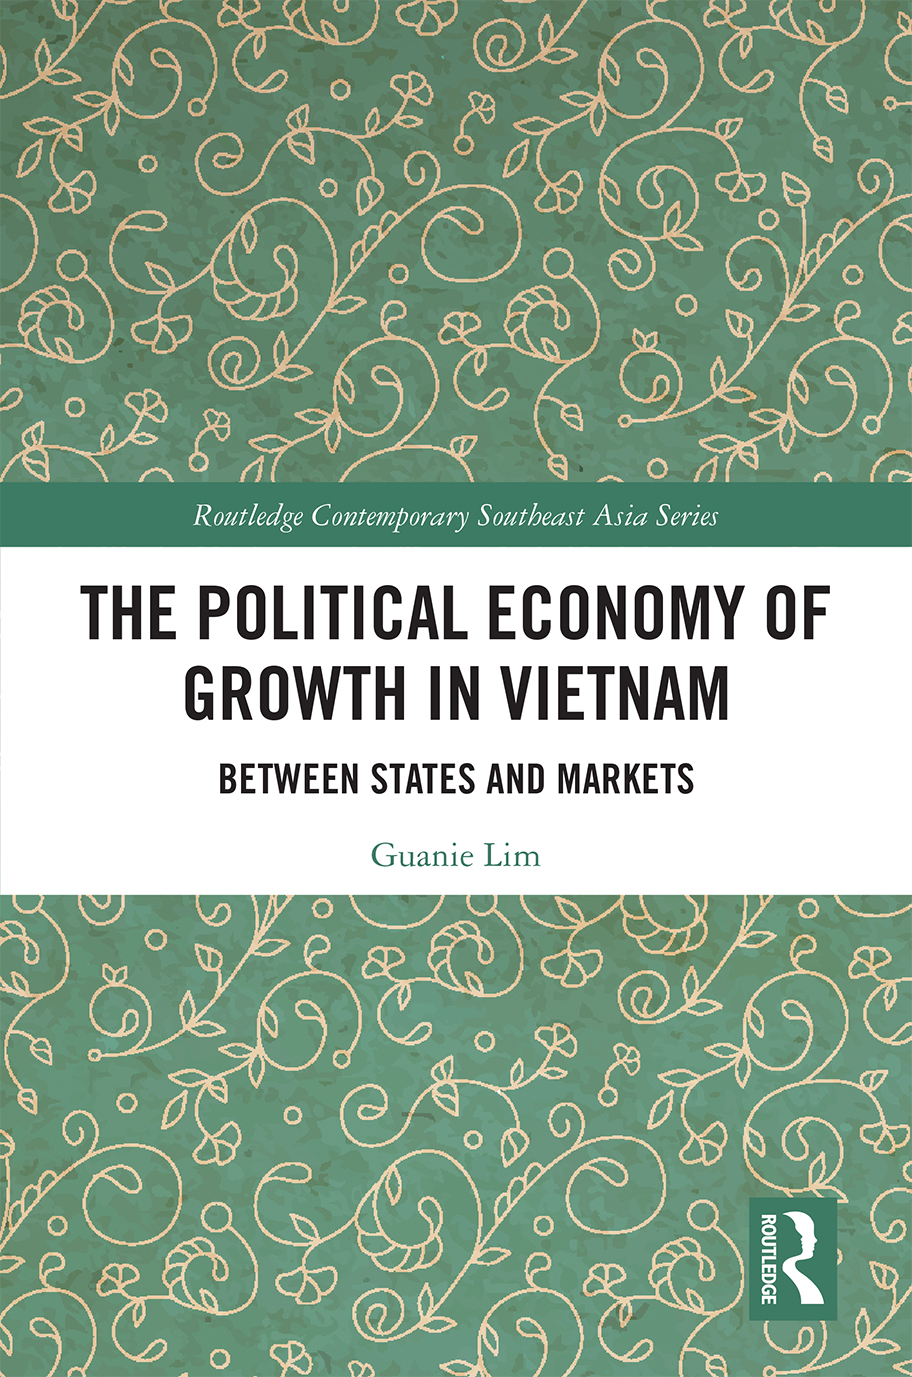 The Political Economy of Growth in Vietnam Since the doi moi reforms in 1986 - photo 1